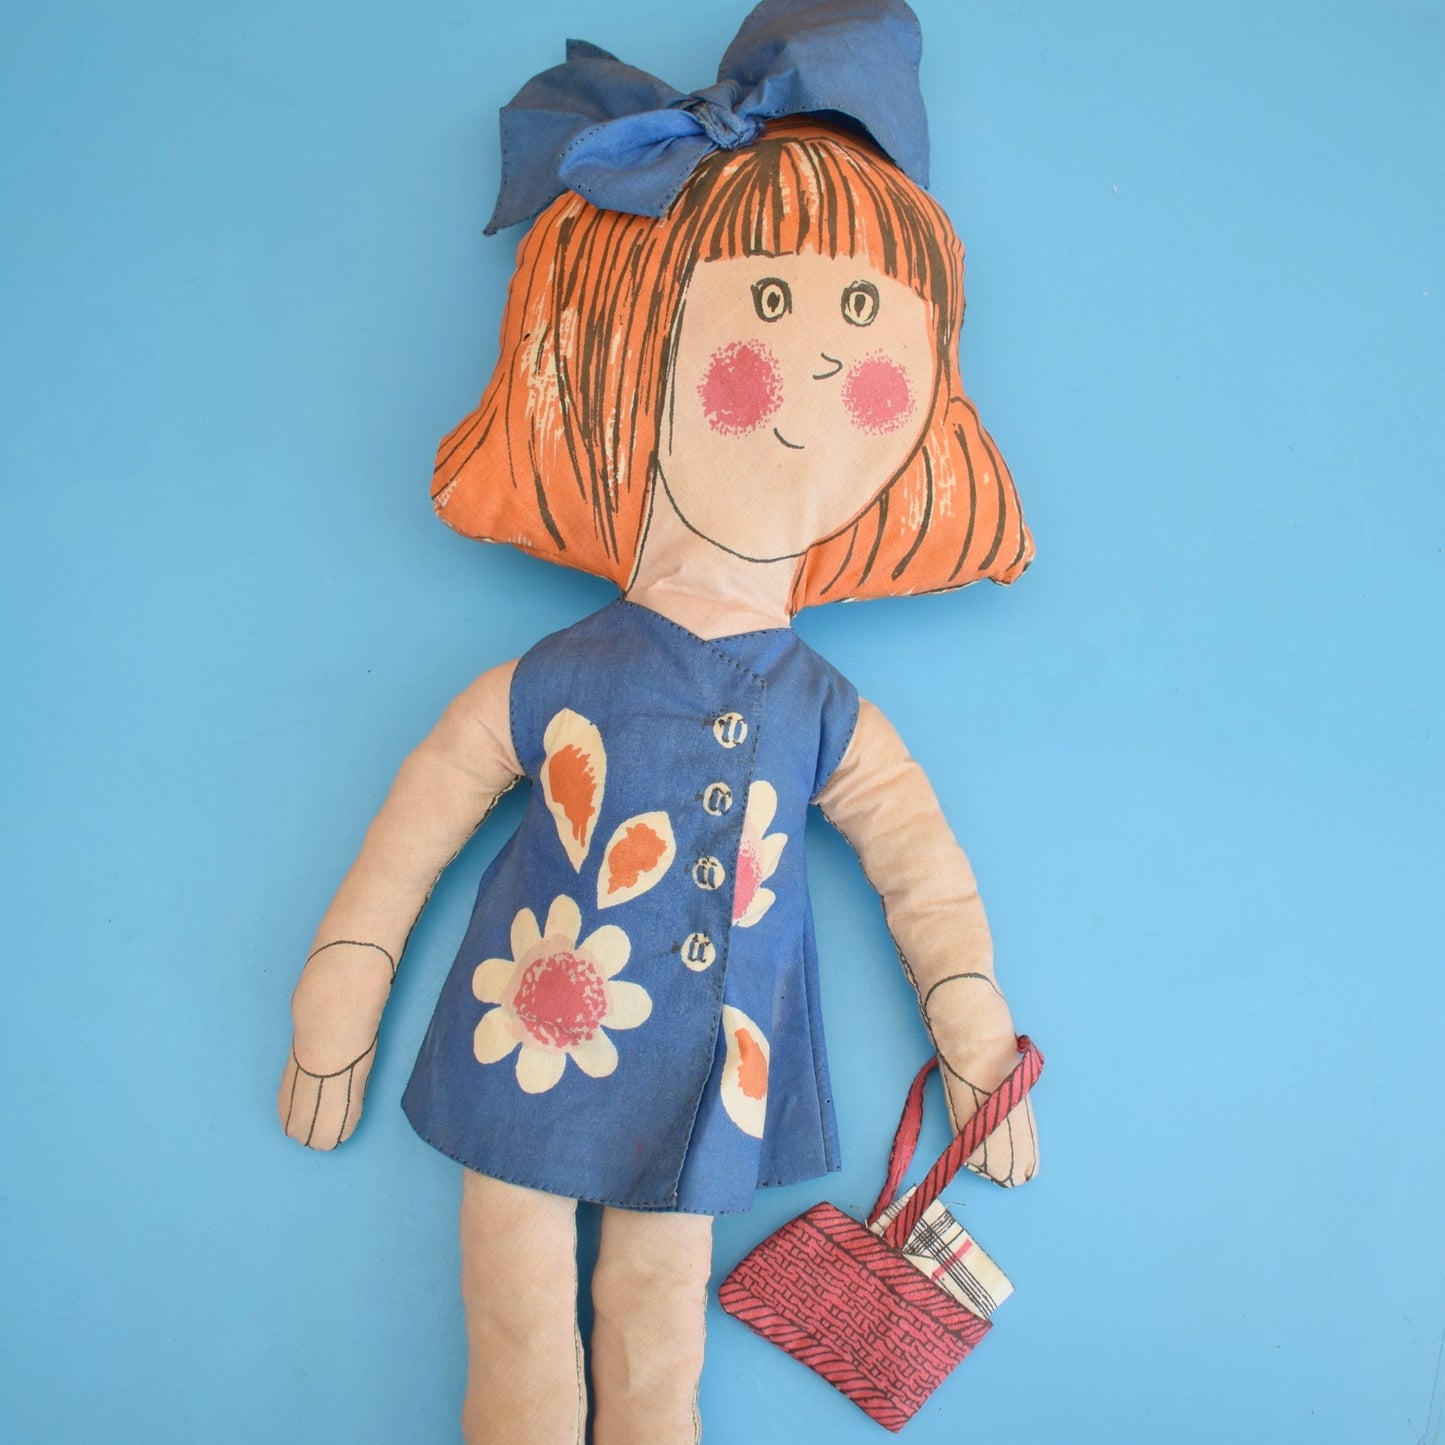 Vintage 1970s Kitsch Fabric Doll  - Red Head